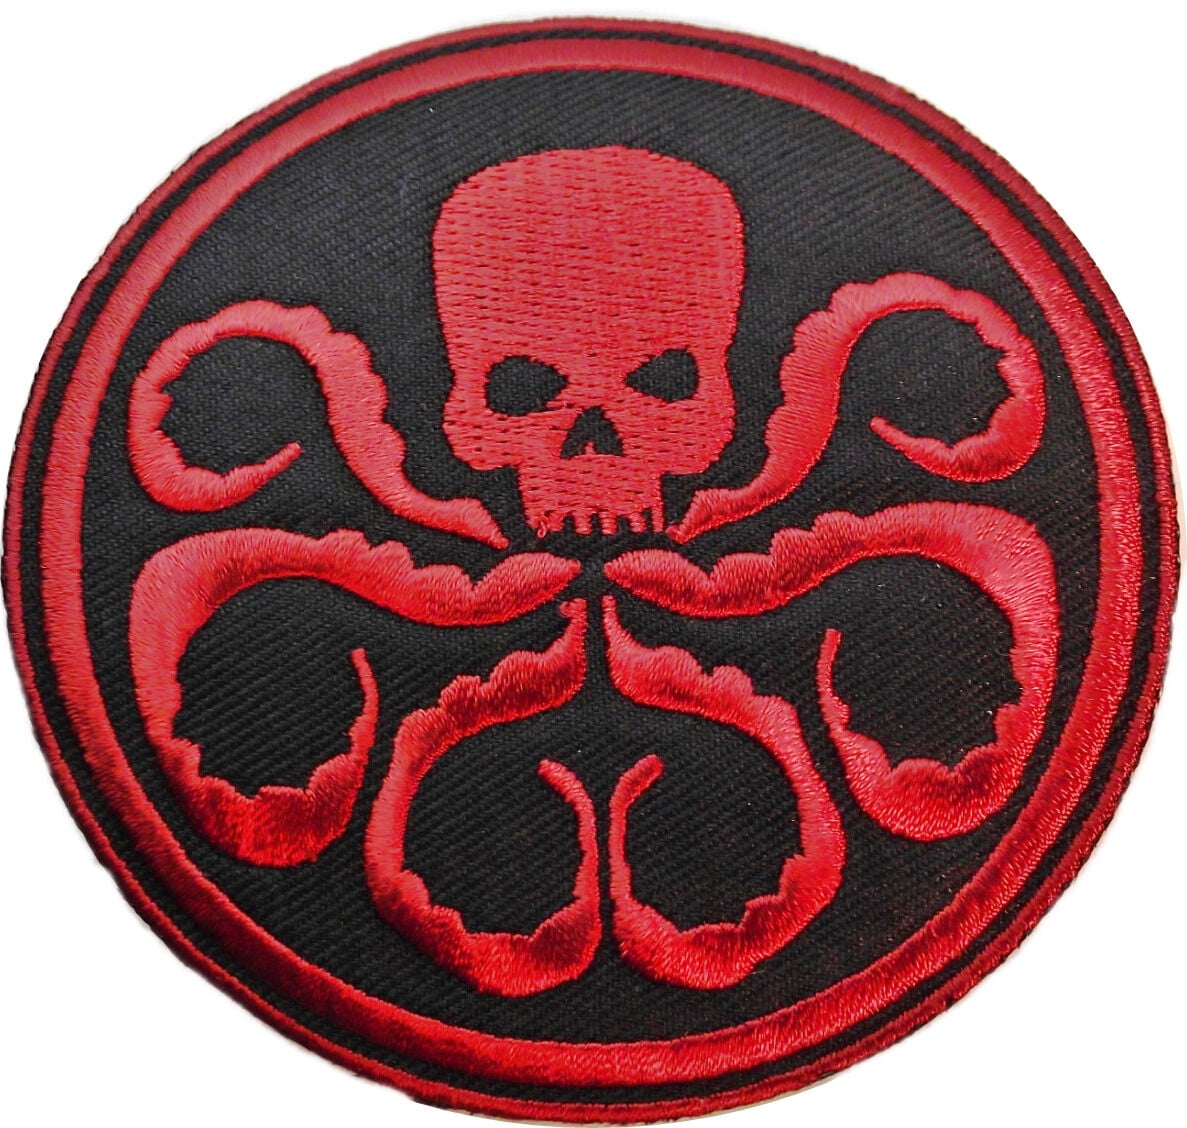 NEW MECCA PATCH RDK01 CHRONICLES OF RIDDICK 